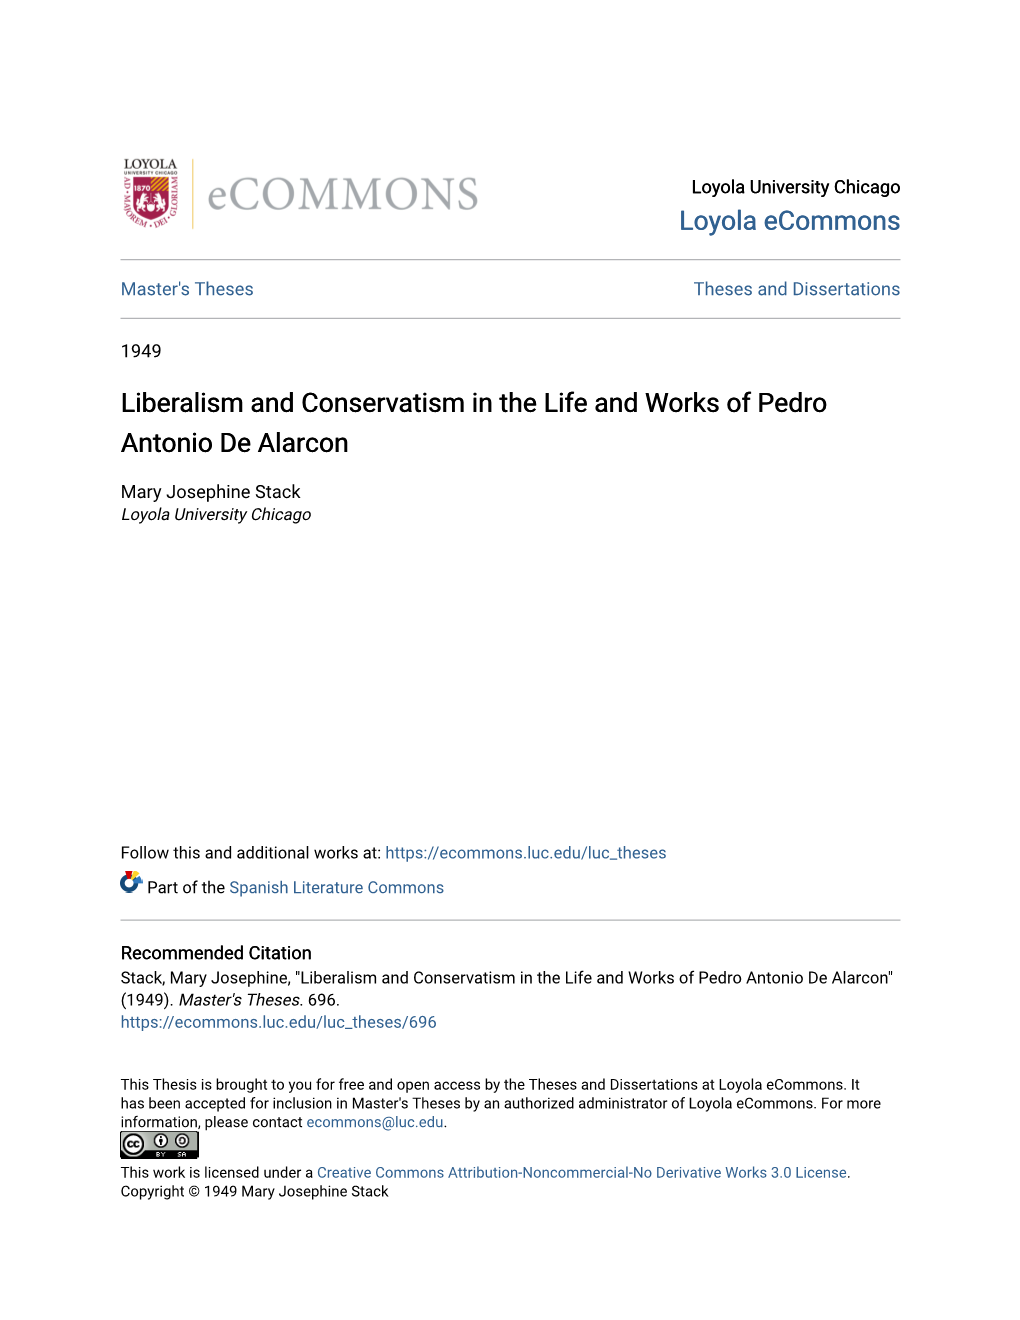 Liberalism and Conservatism in the Life and Works of Pedro Antonio De Alarcon